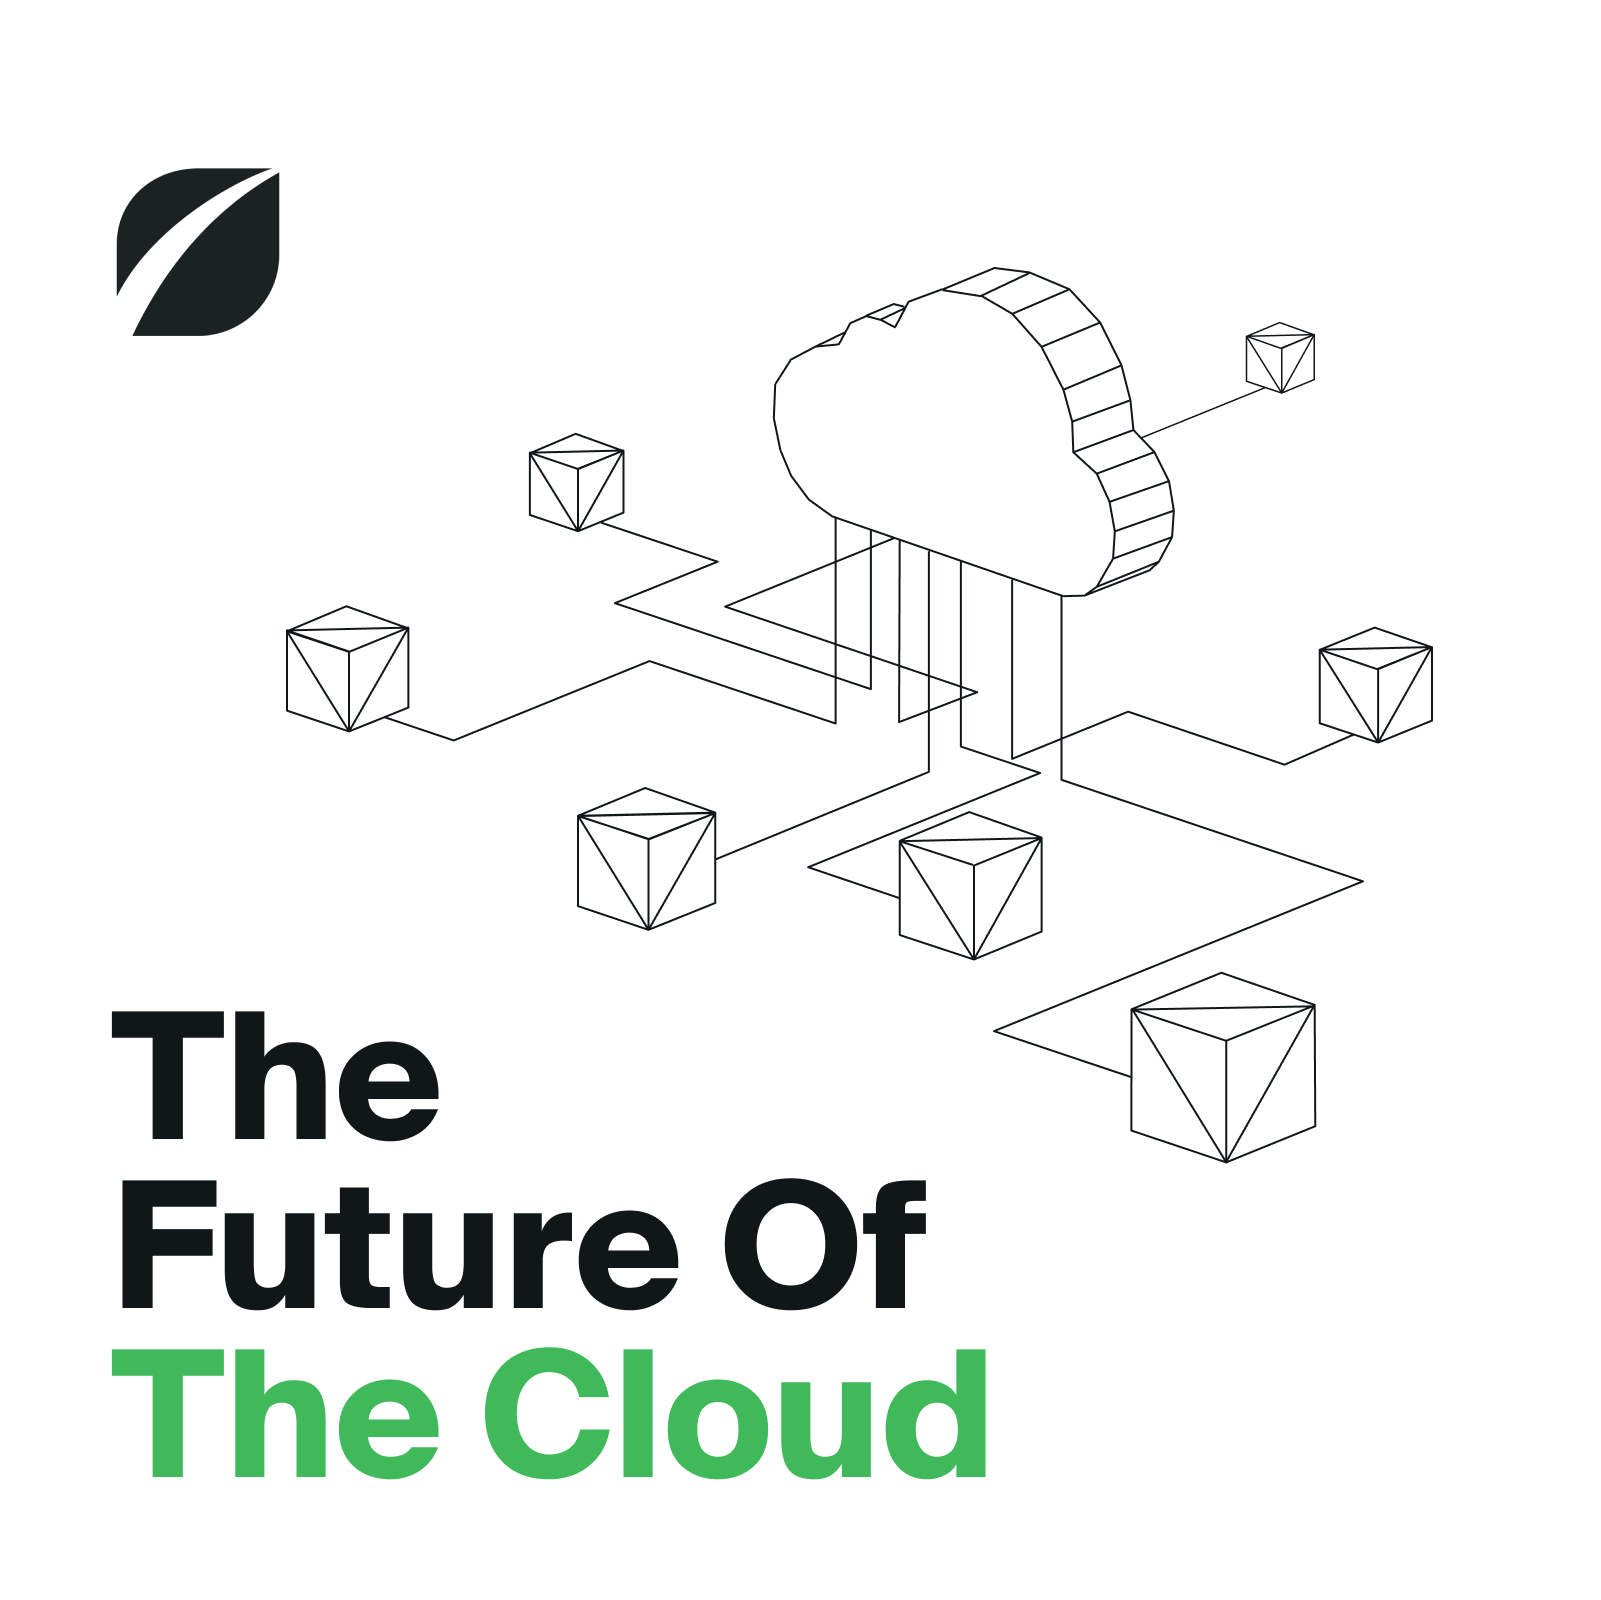 The Future Of The Cloud